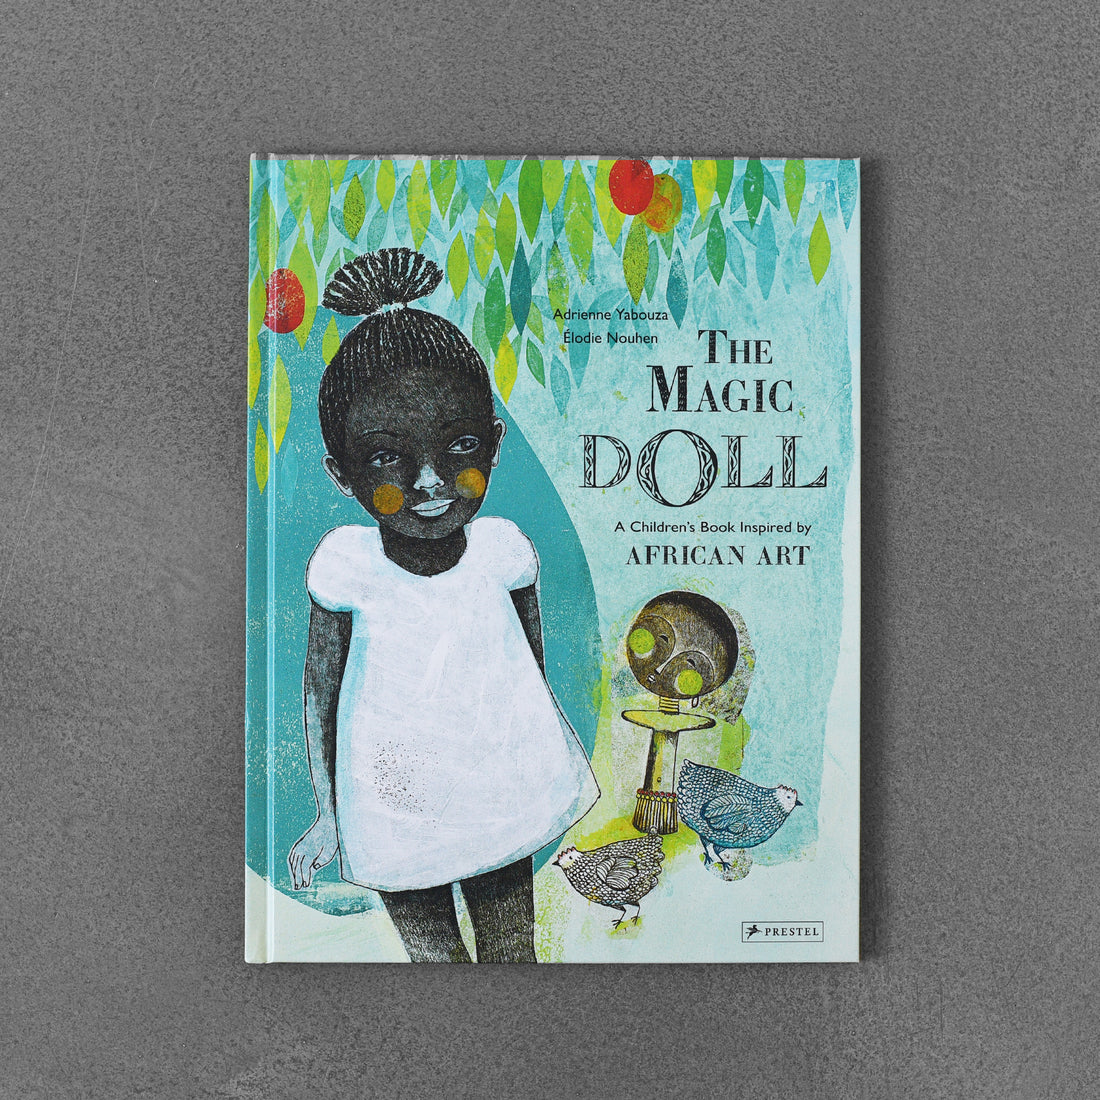 The Magic Doll: A Children’s Book Inspired by African Art